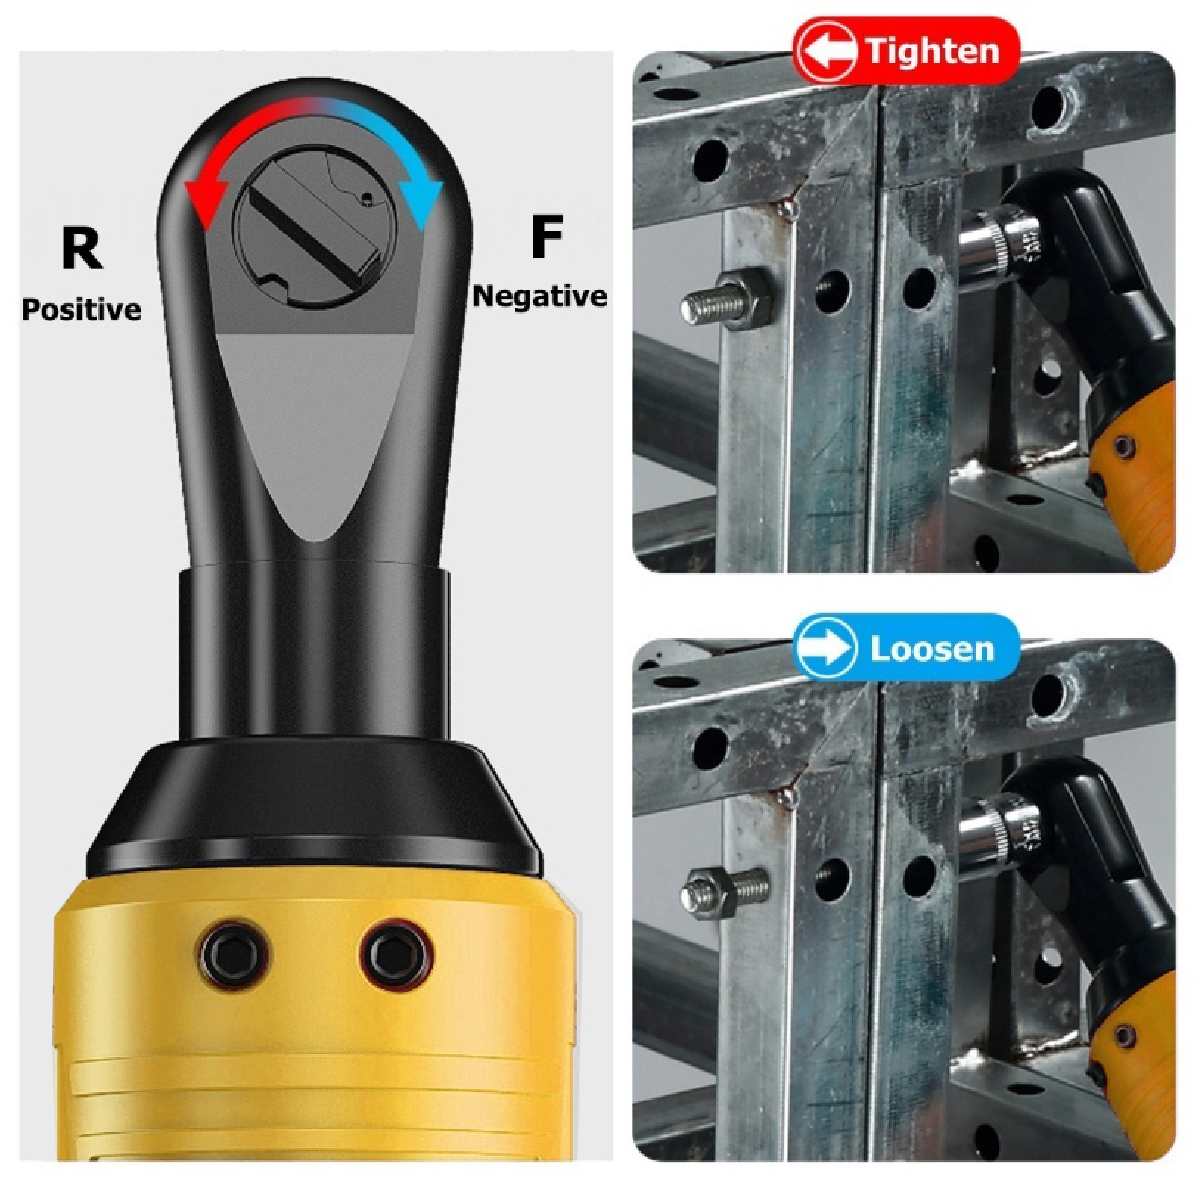 Efficient 12V Electric Wrench Angle Drill Screwdriver 3/8 Cordless Ratchet Wrench Scaffolding 65NM With 1/2 Lithium-Ion Battery